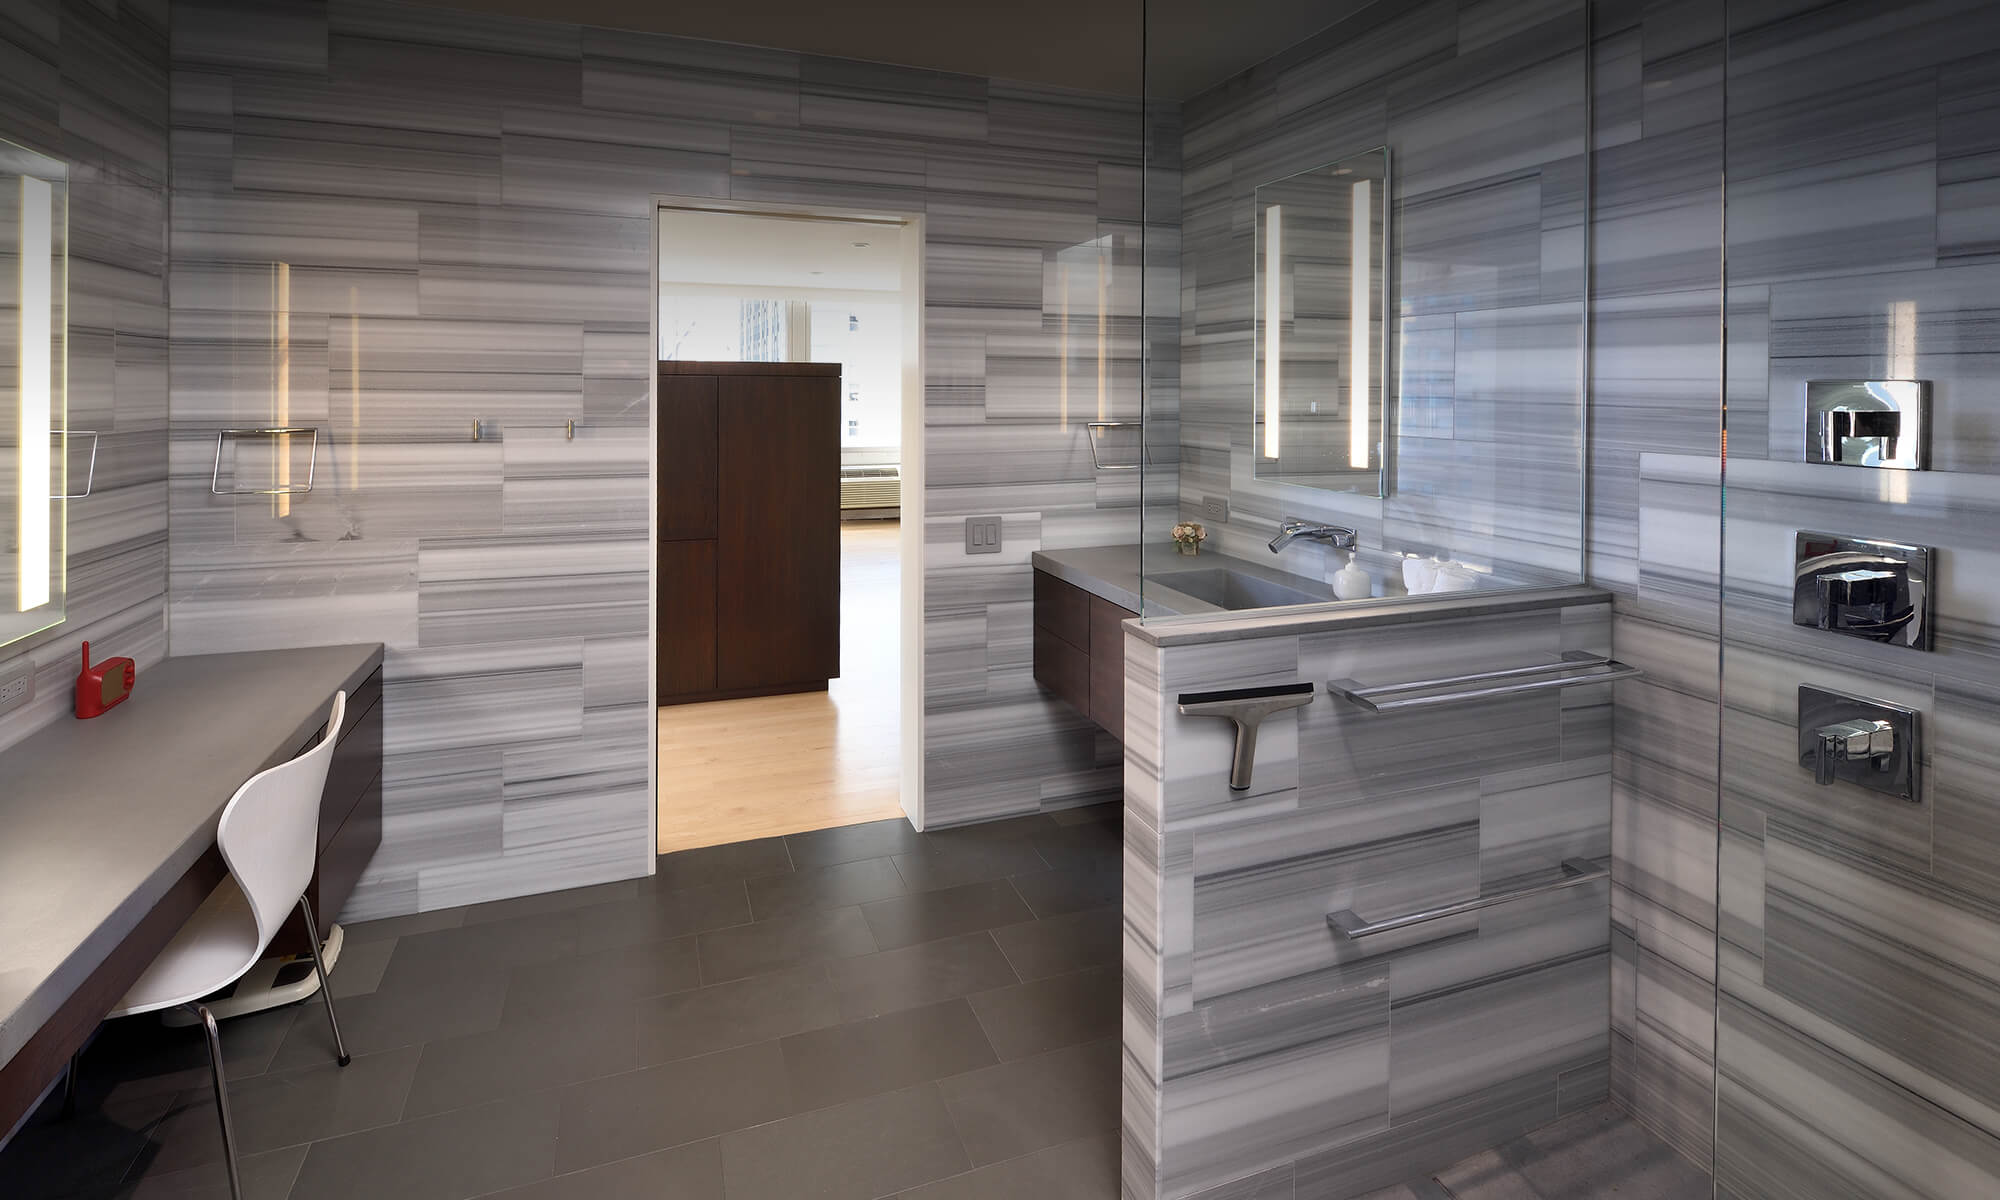 Artistic Construction tiled modern bathroom with walk-in glass shower